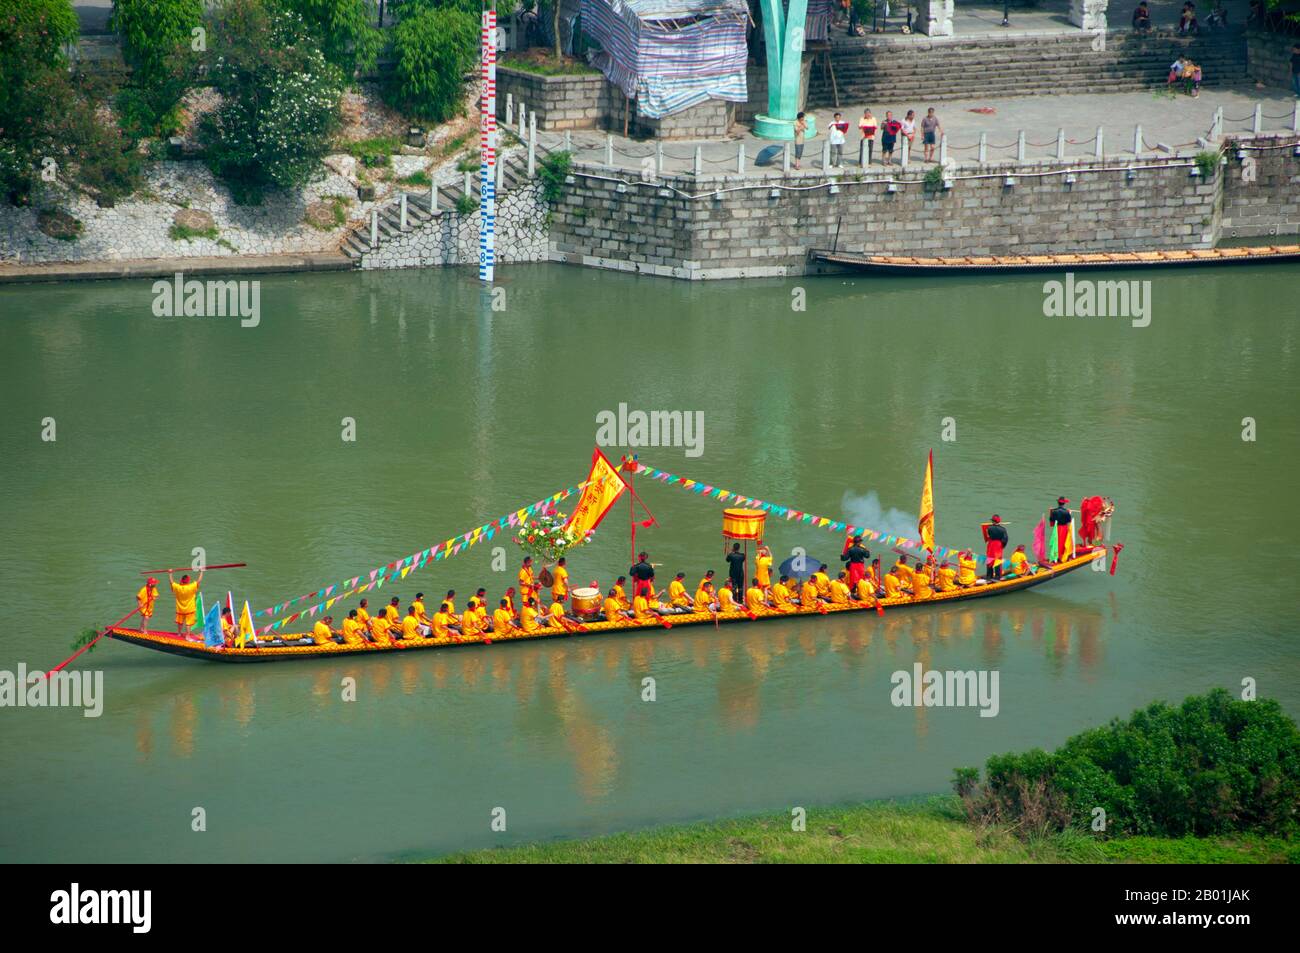 China: Ceremonial boat on the Li River from Fubo Shan (Wave-Subduing Hill), Guilin, Guangxi Province.  Guilin's Dragon Boat Festival is held on the fifth day of the fifth month (May) of the Chinese lunar calendar every 3 years. The festival was originally held in memory of the great Chinese poet, Quyuan.  The name Guilin means ‘Cassia Woods’ and is named after the osmanthus (cassia) blossoms that bloom throughout the autumn period.  Guilin is the scene of China’s most famous landscapes, inspiring thousands of paintings over many centuries. Stock Photo